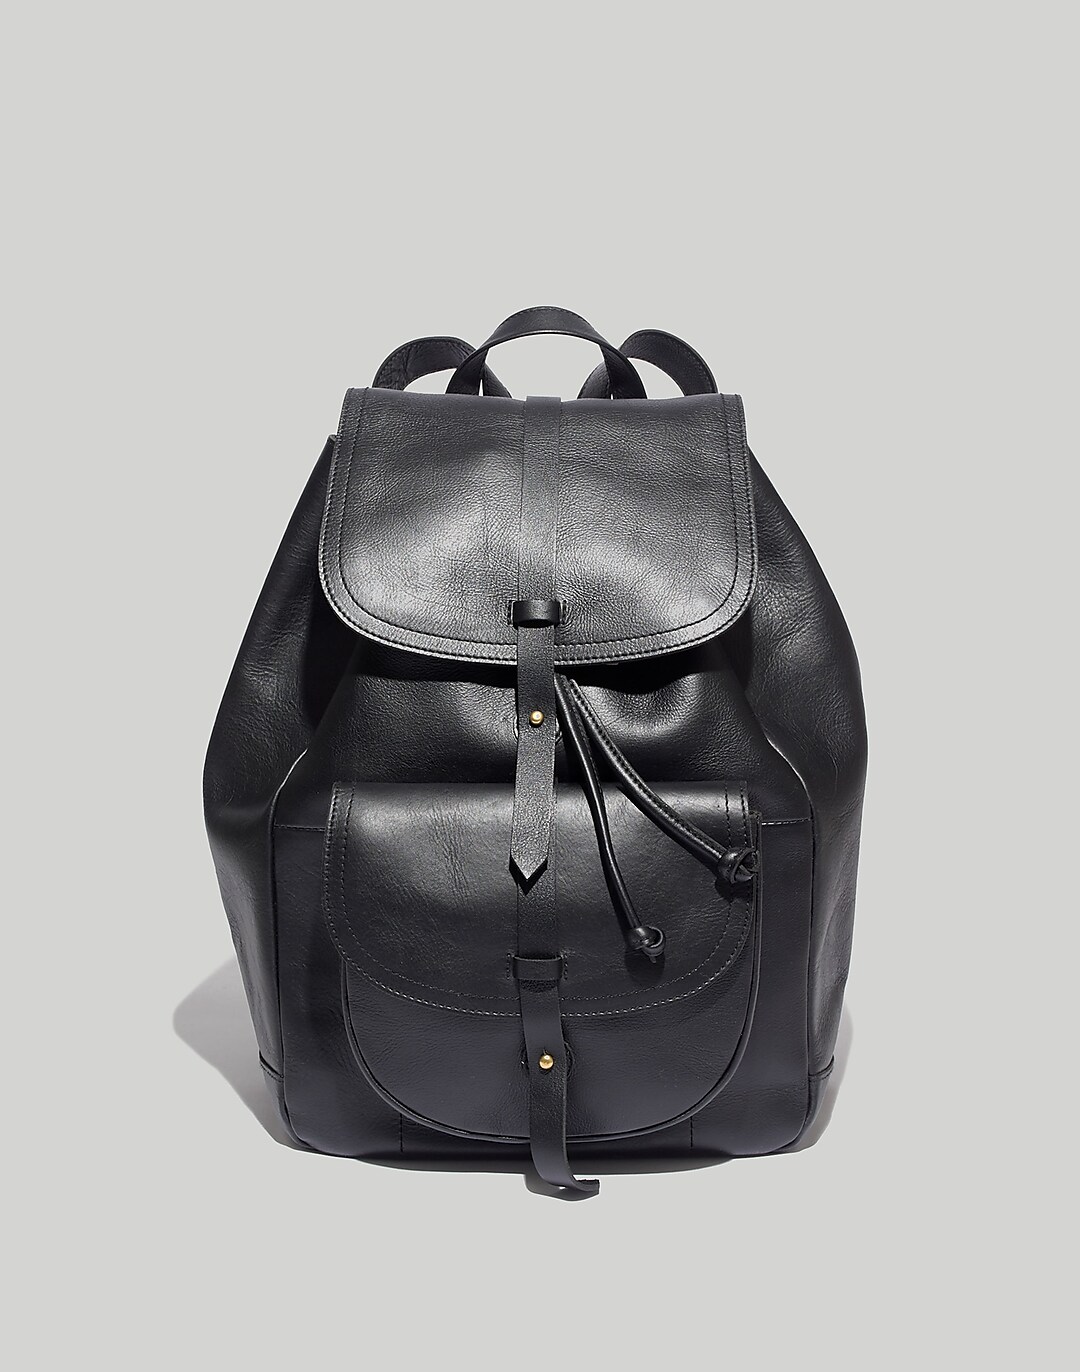 Madewell The Transport Rucksack True Black One Size